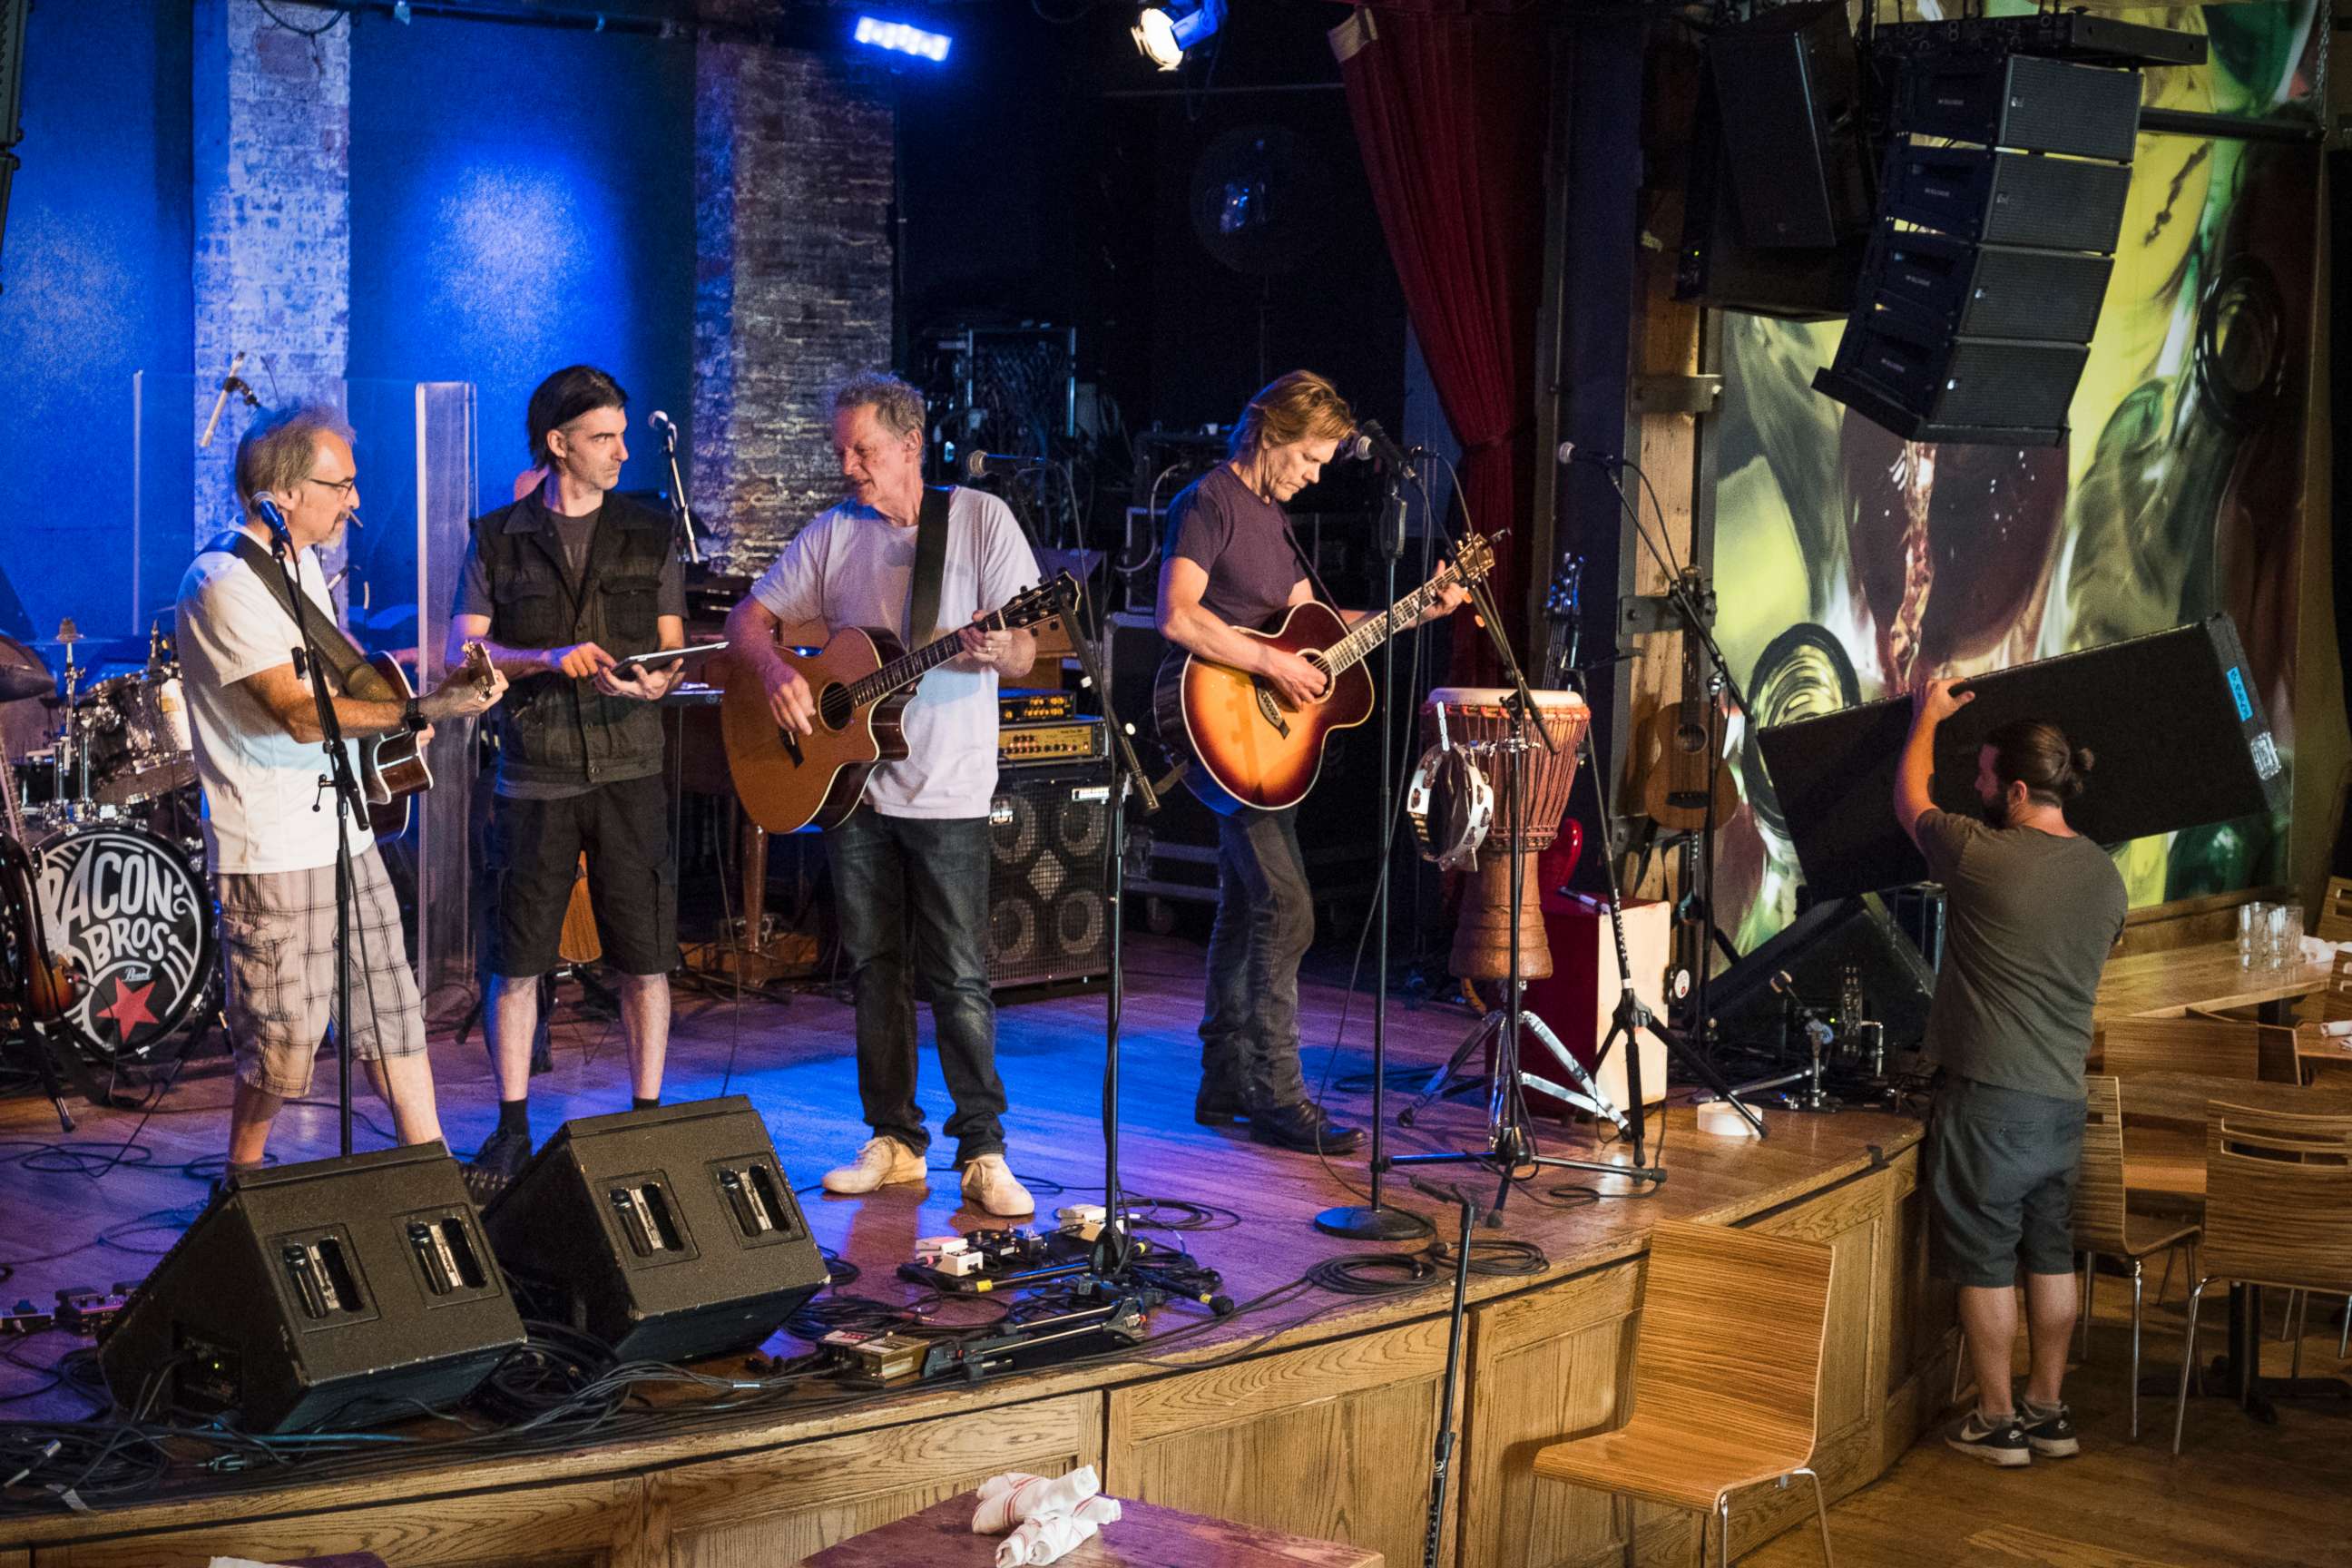 PHOTO: The Bacon Brothers has a sound check before their sold out show at City Winery in New York City, on August 22.